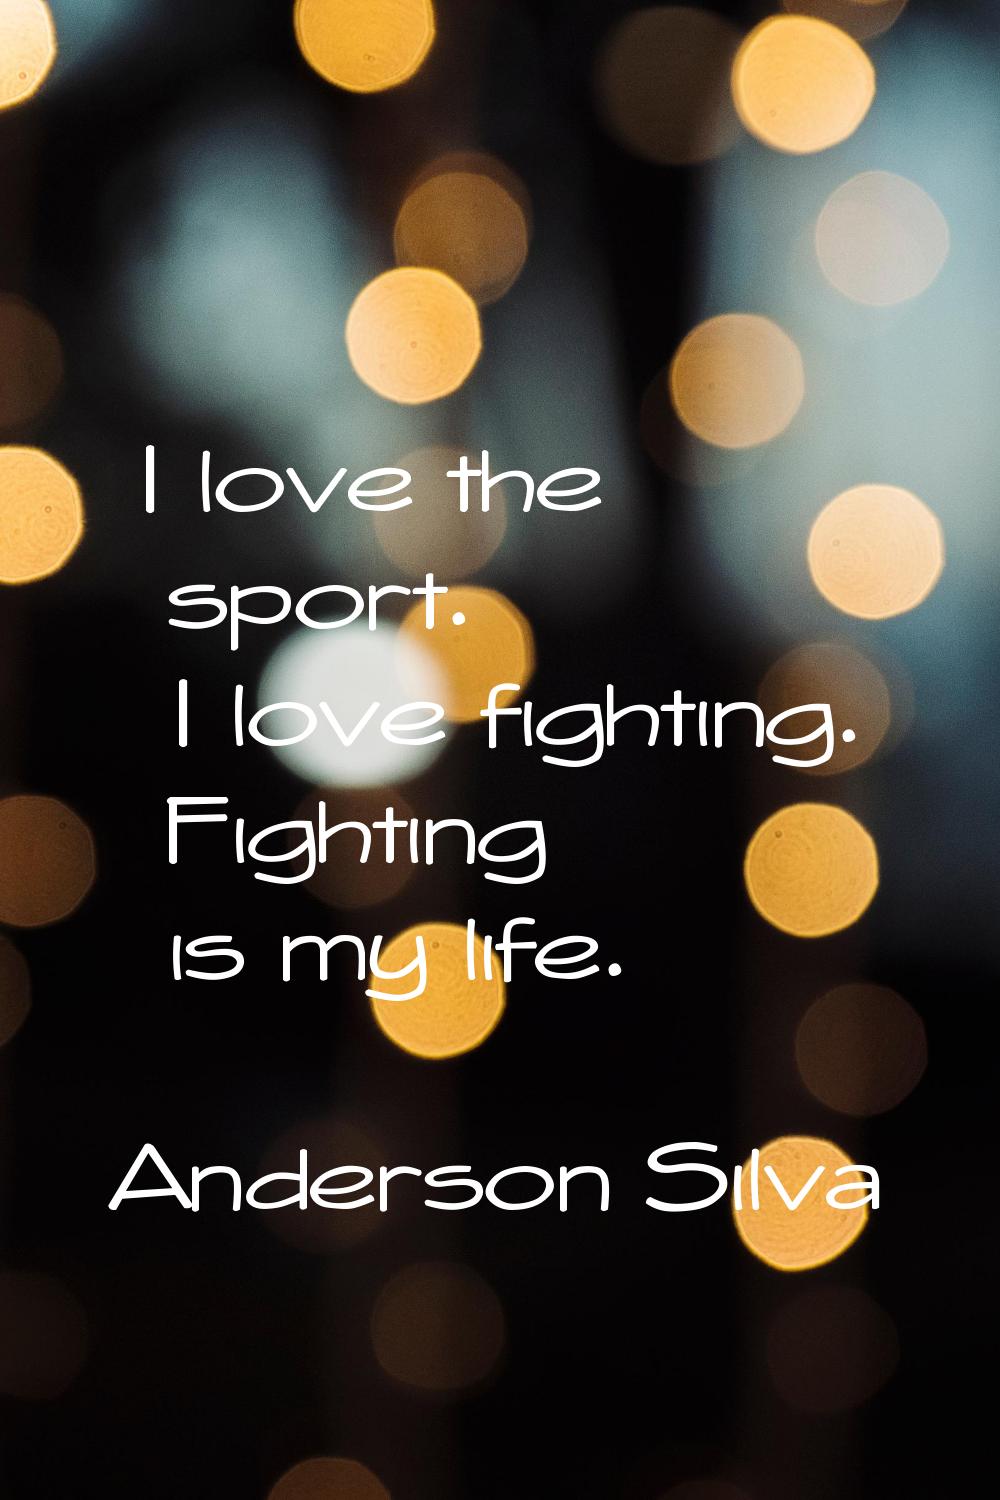 I love the sport. I love fighting. Fighting is my life.